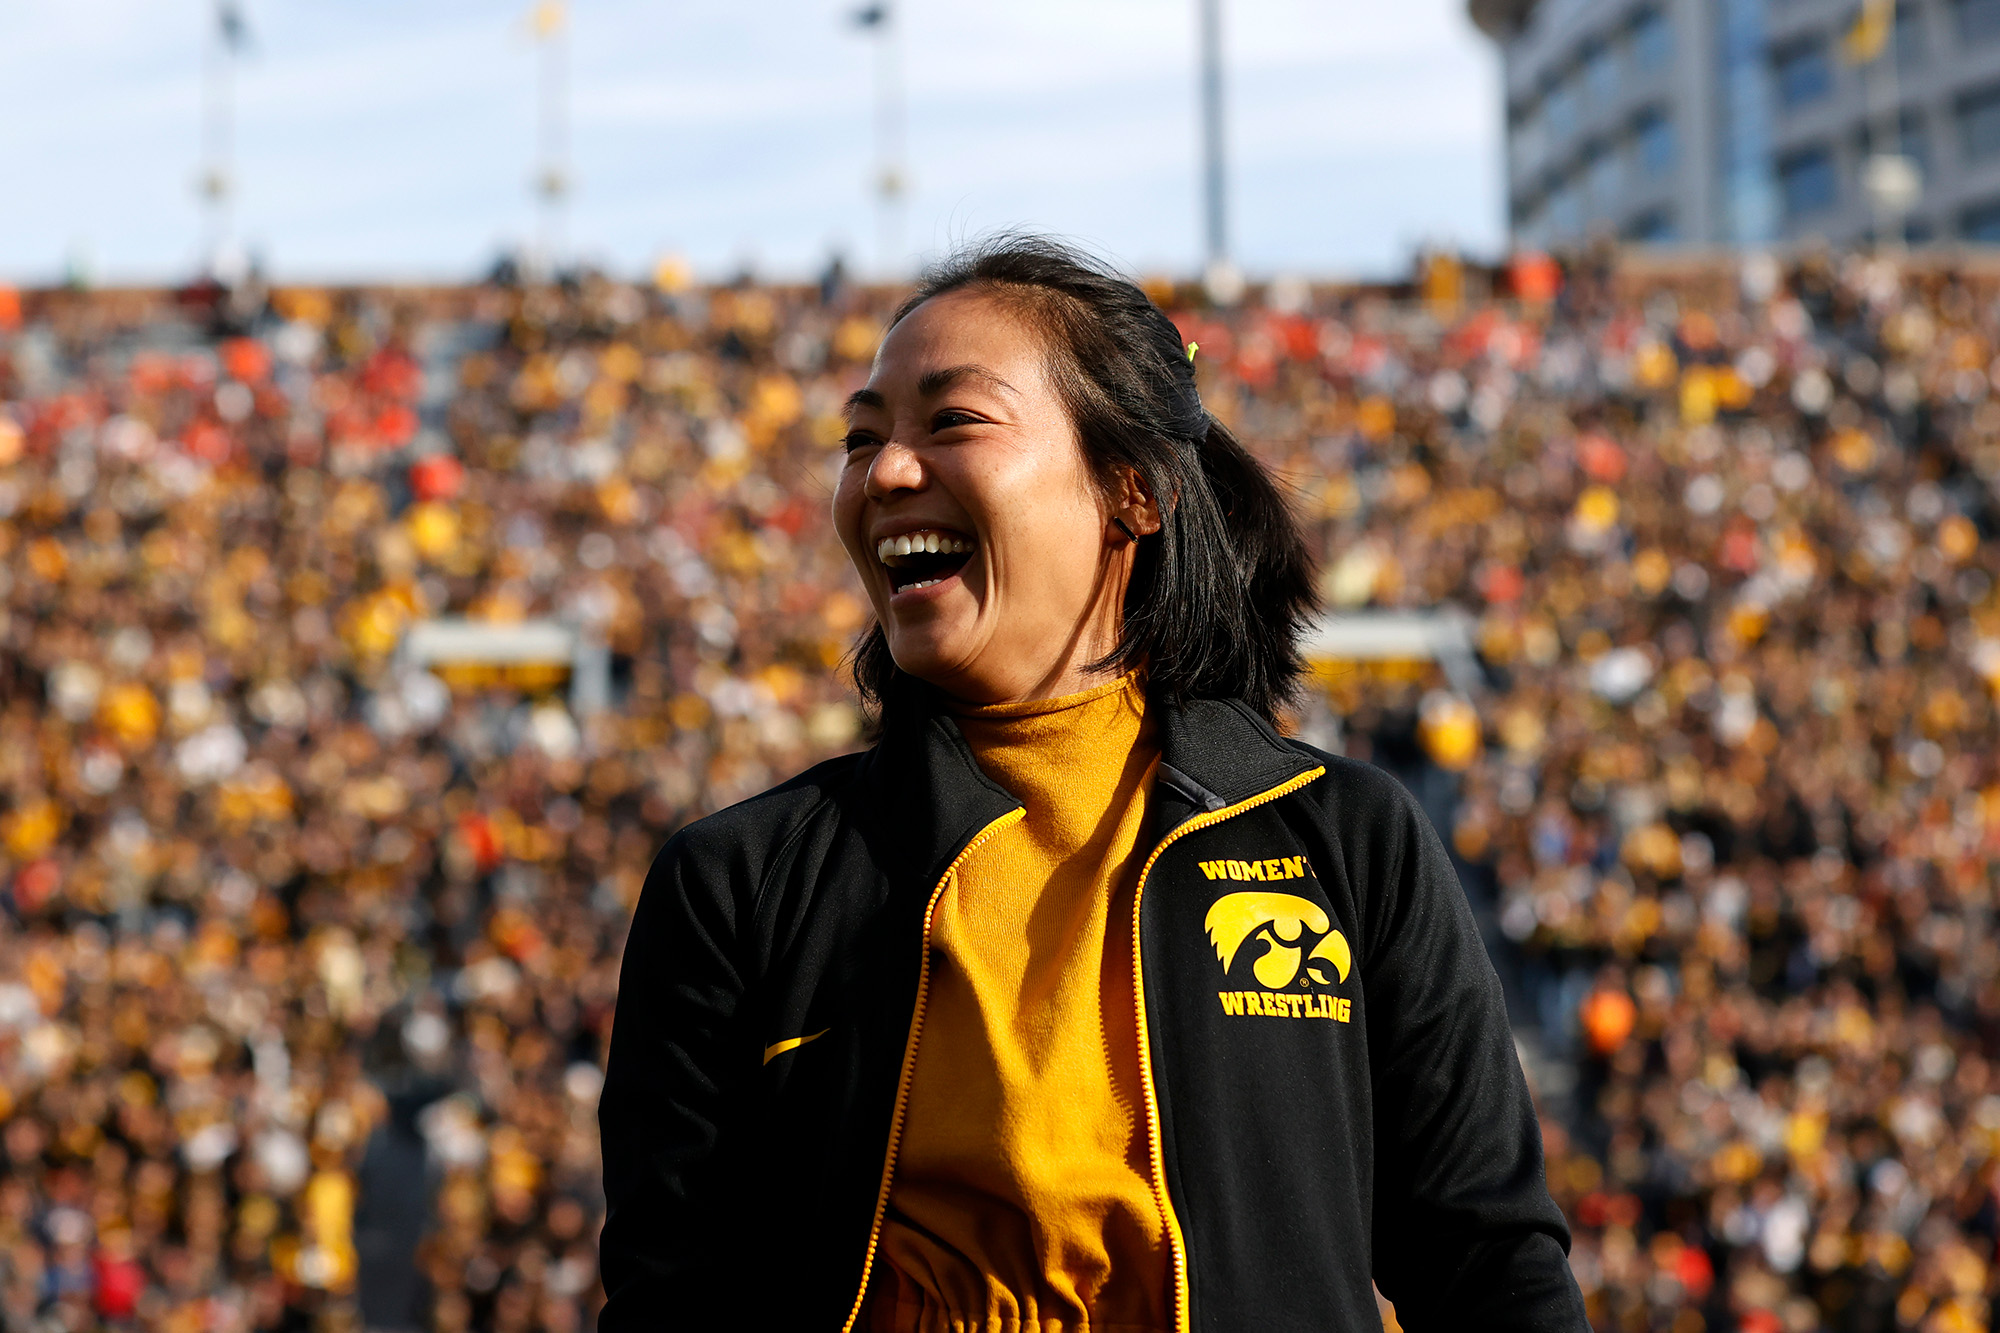 university of iowa women's wrestling coach Clarissa Chun smiles while being introduced at a football game